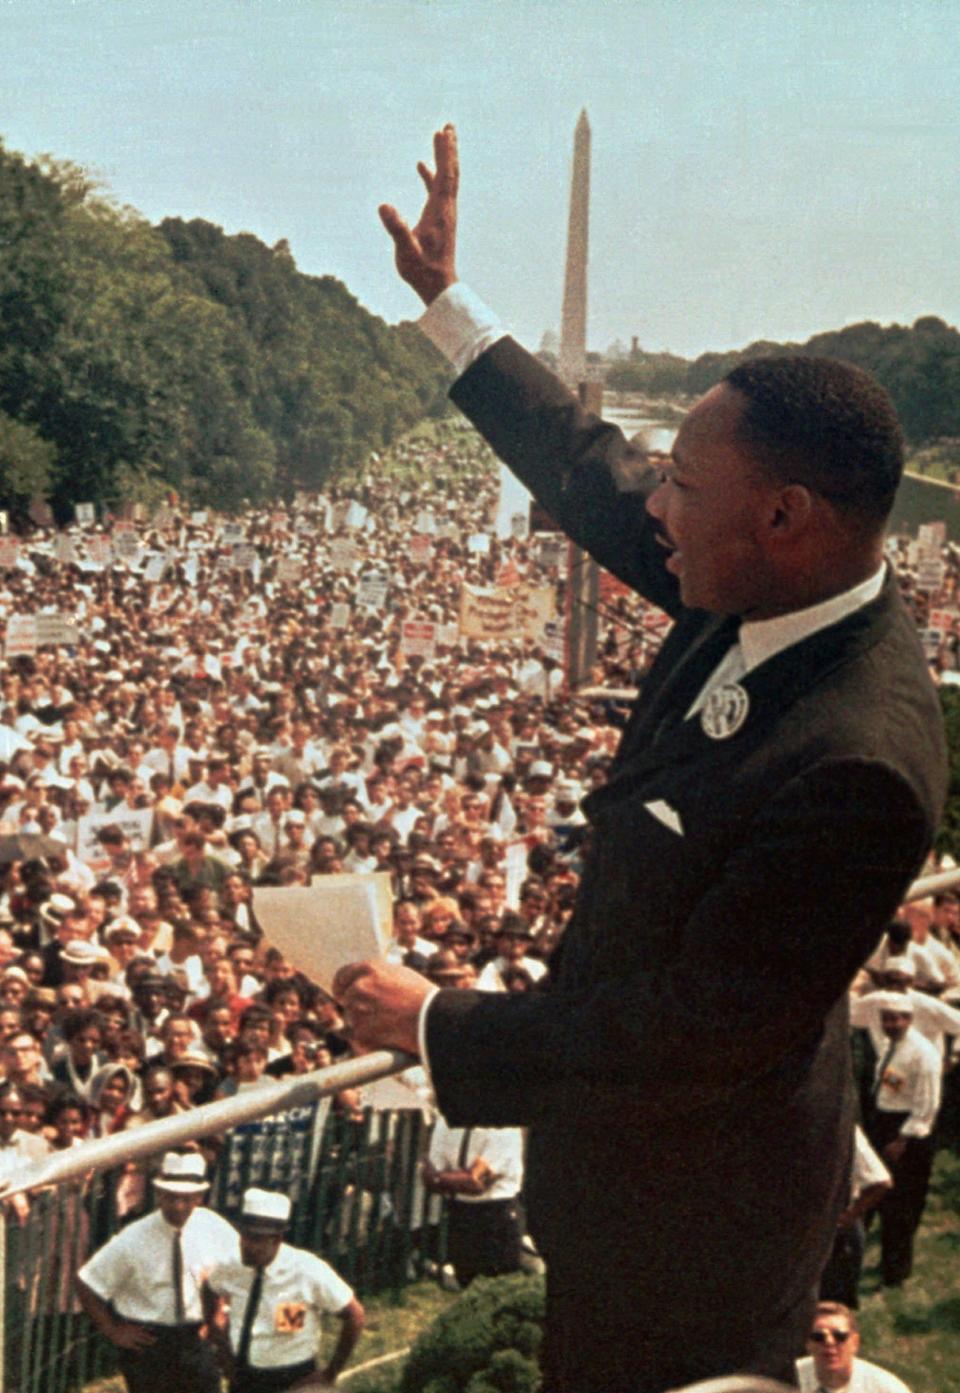 Dr. Martin Luther King Jr. acknowledges the crowd at the Lincoln Memorial for his "I Have a Dream" speech during the March on Washington, D.C. on Aug. 28, 1963.